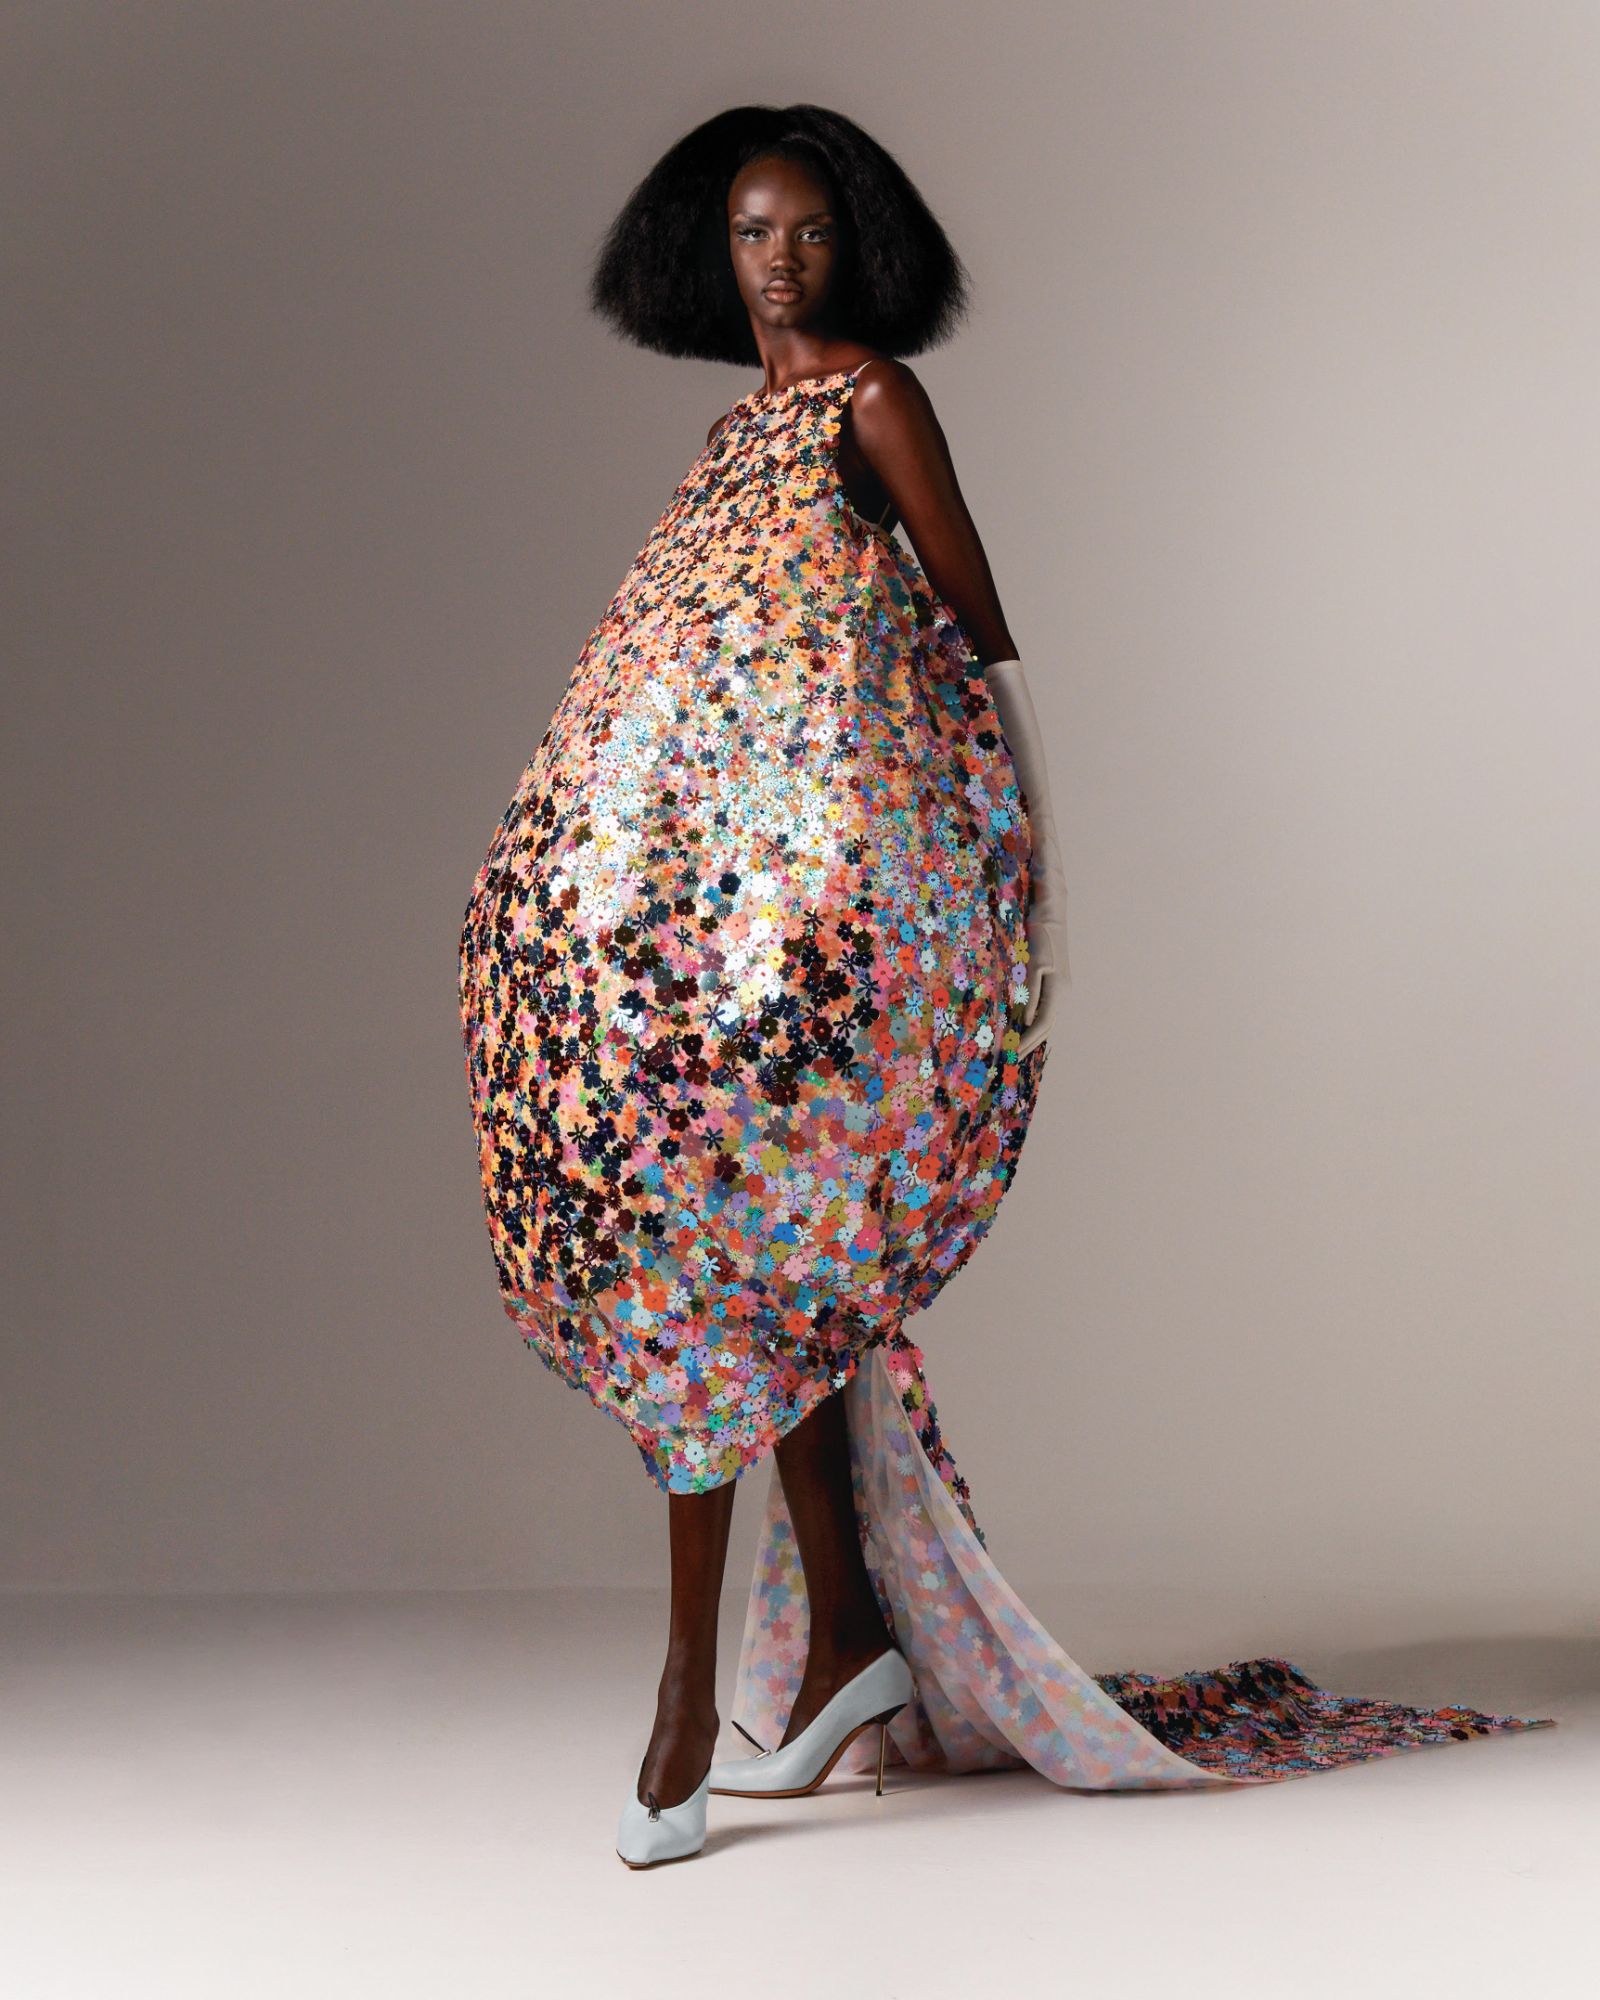 Model wearing a bubble shaped dress covered in bespoke cut flower sequins